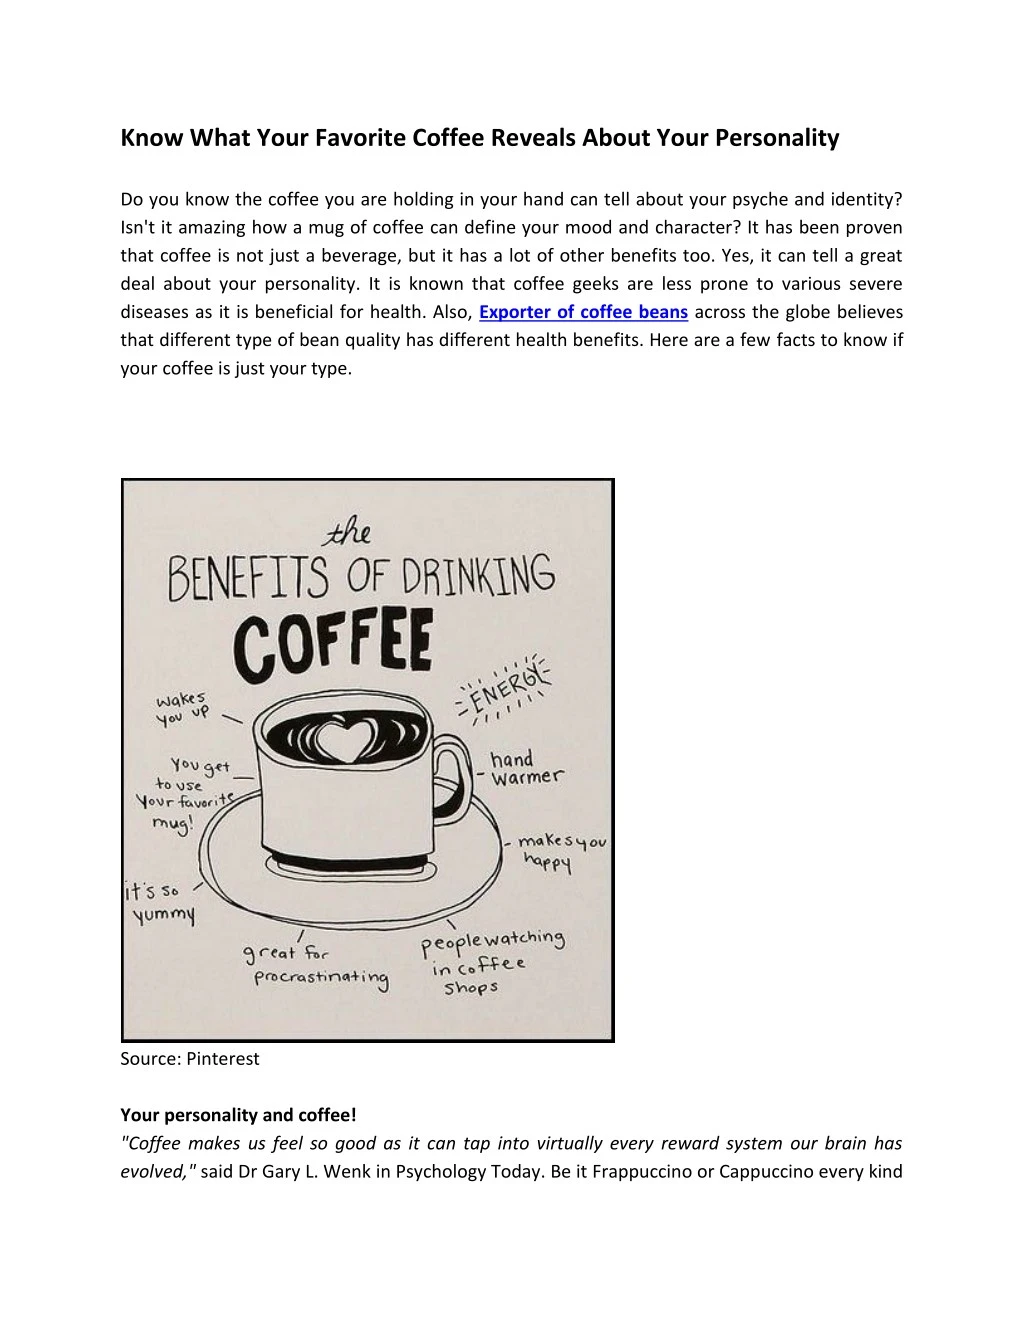 PPT - Know What Your Favorite Coffee Reveals About Your Personality ...